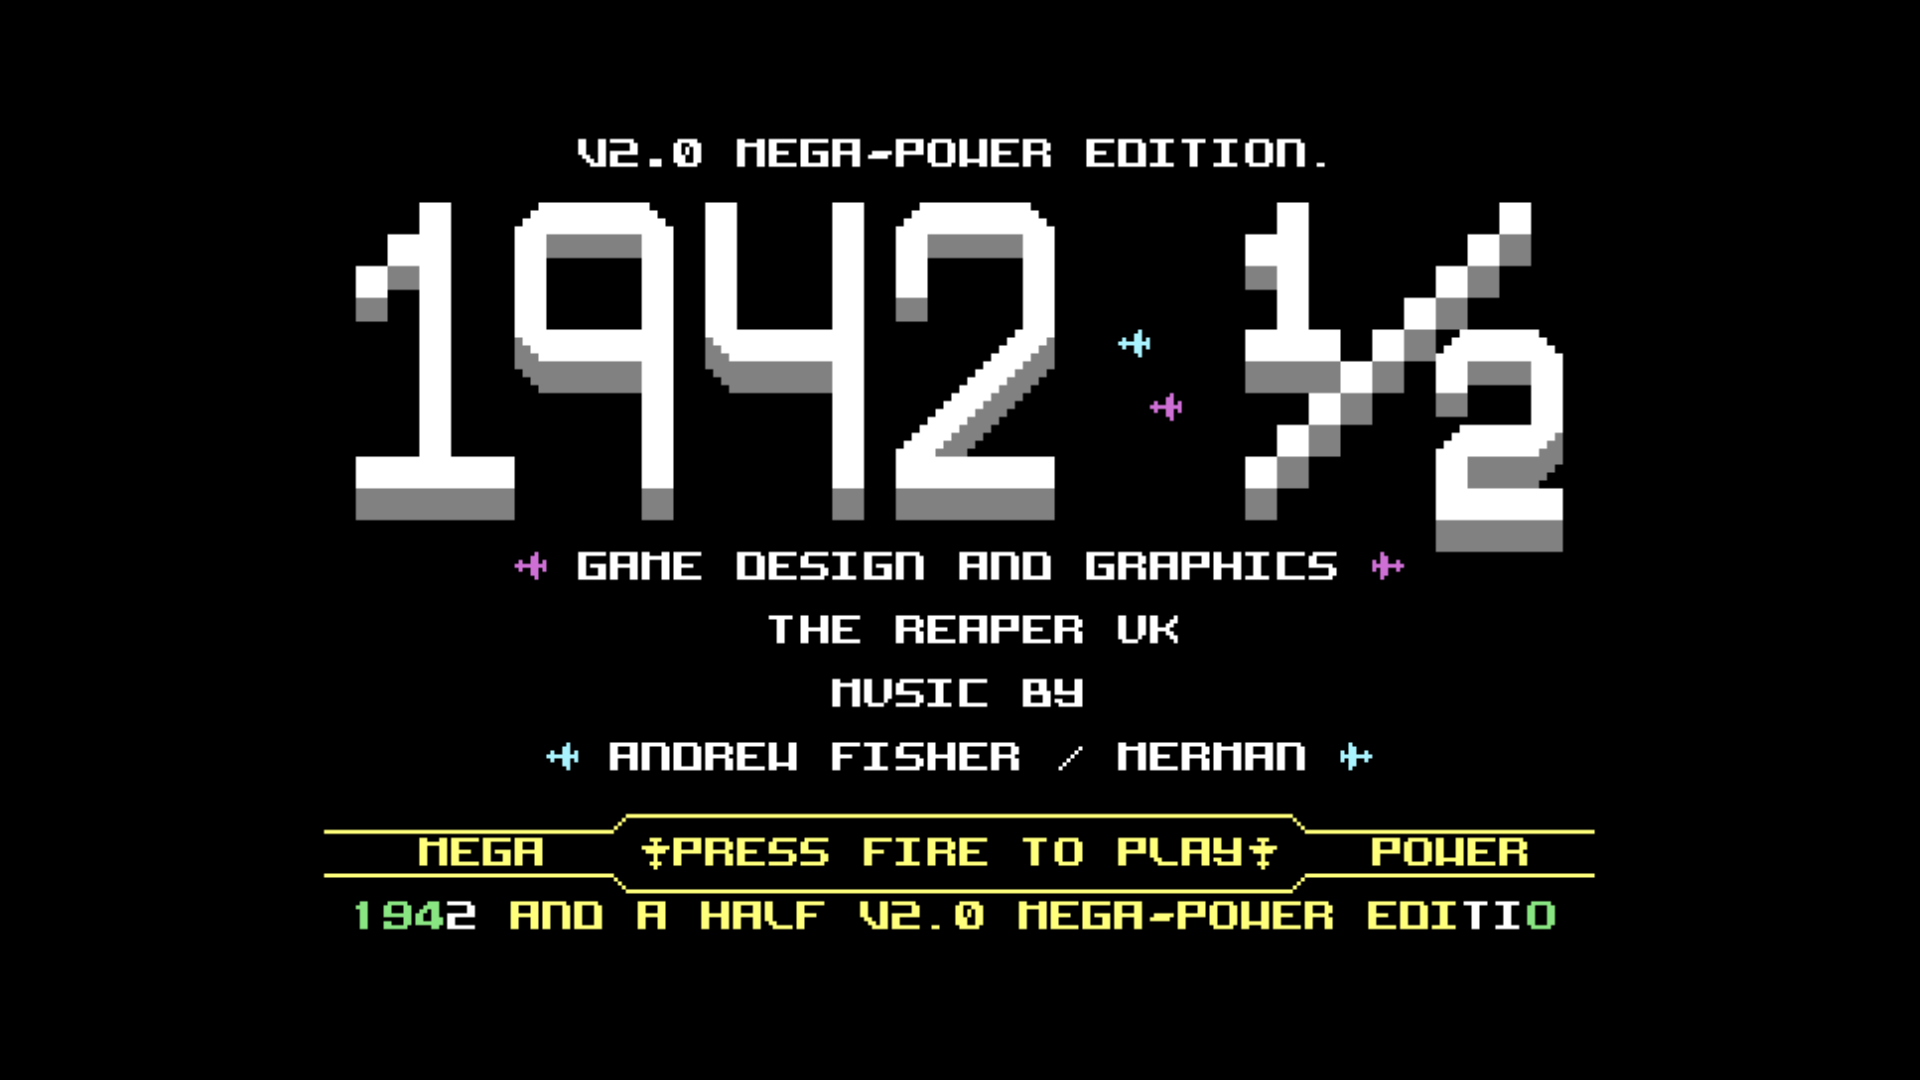 1942 And a Half (C64)